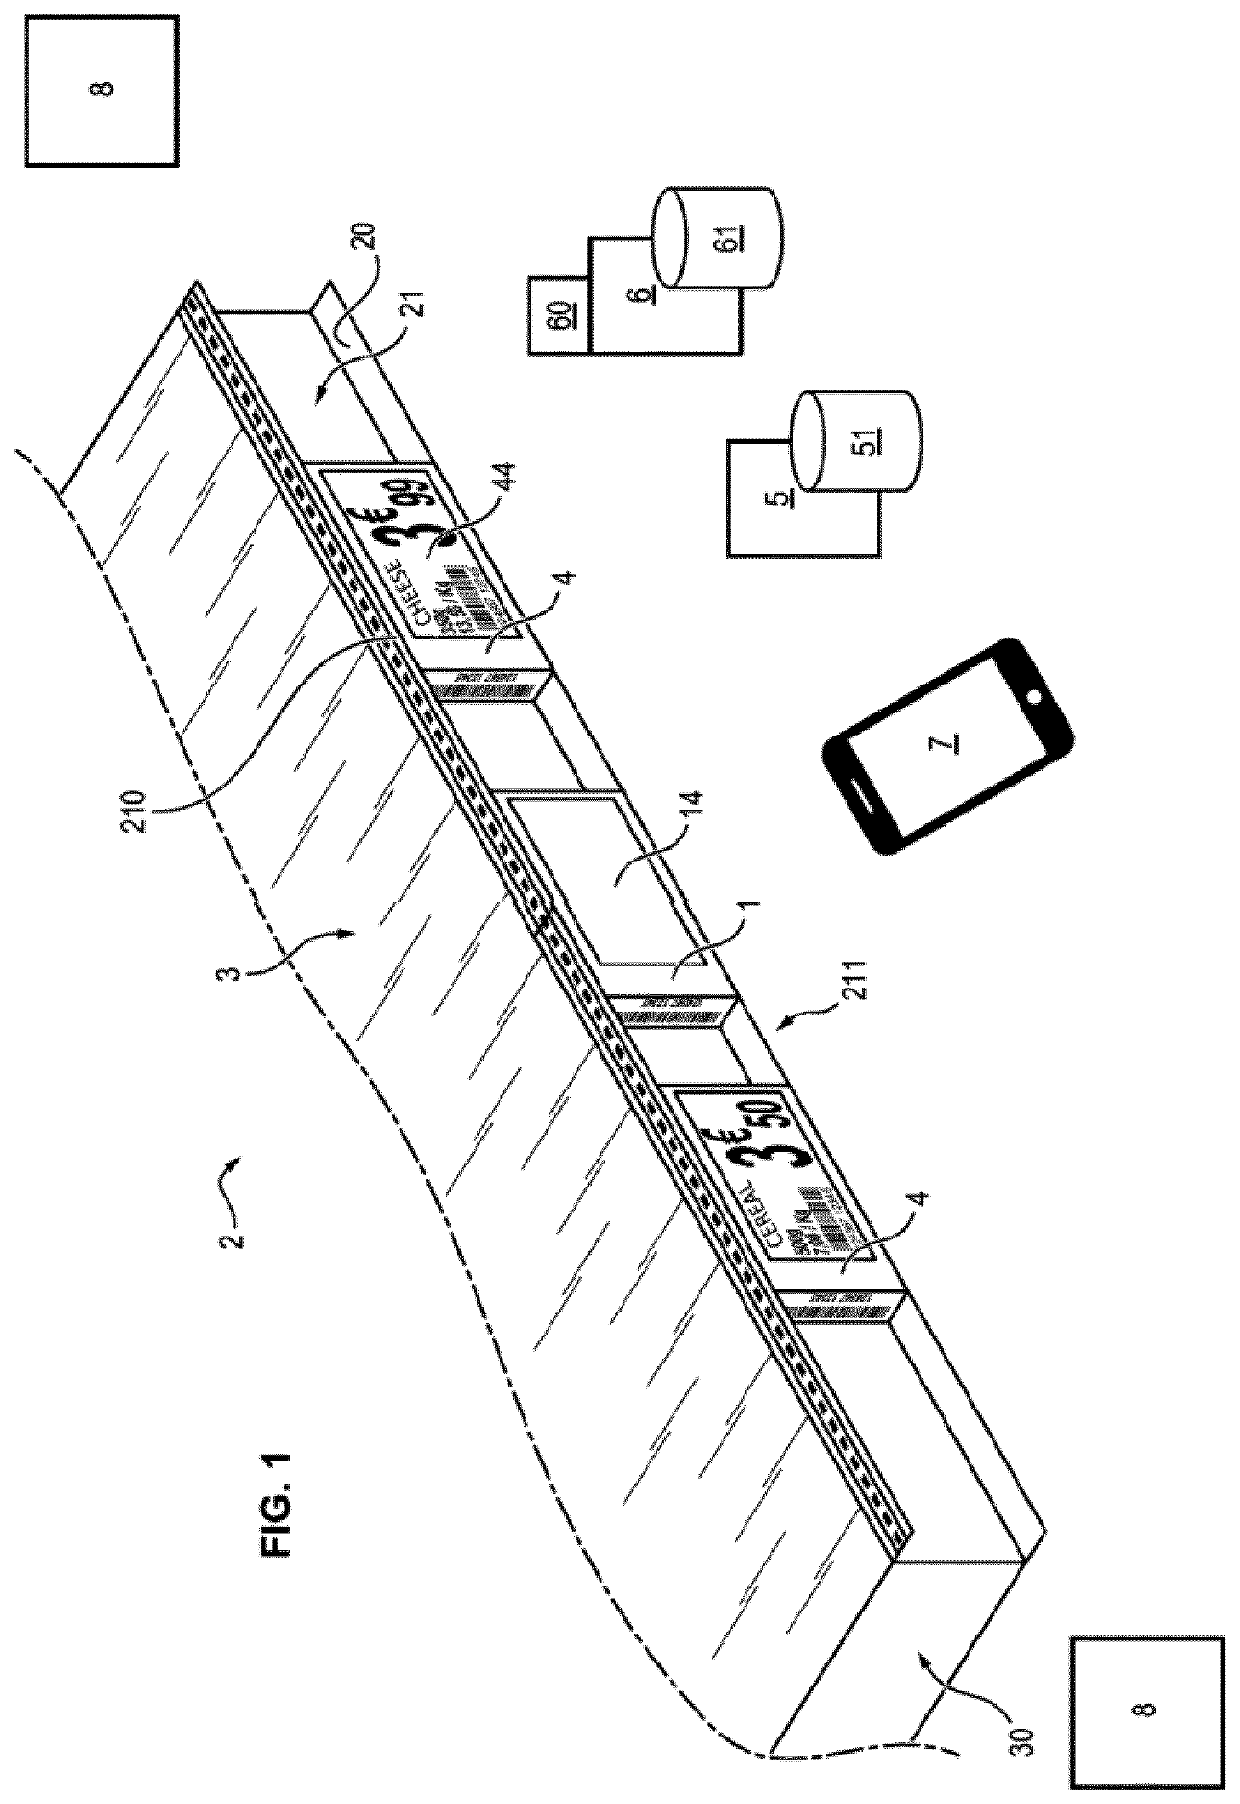 Imaging Device For A Shelf Support And Shelf System Comprising The Imaging Device